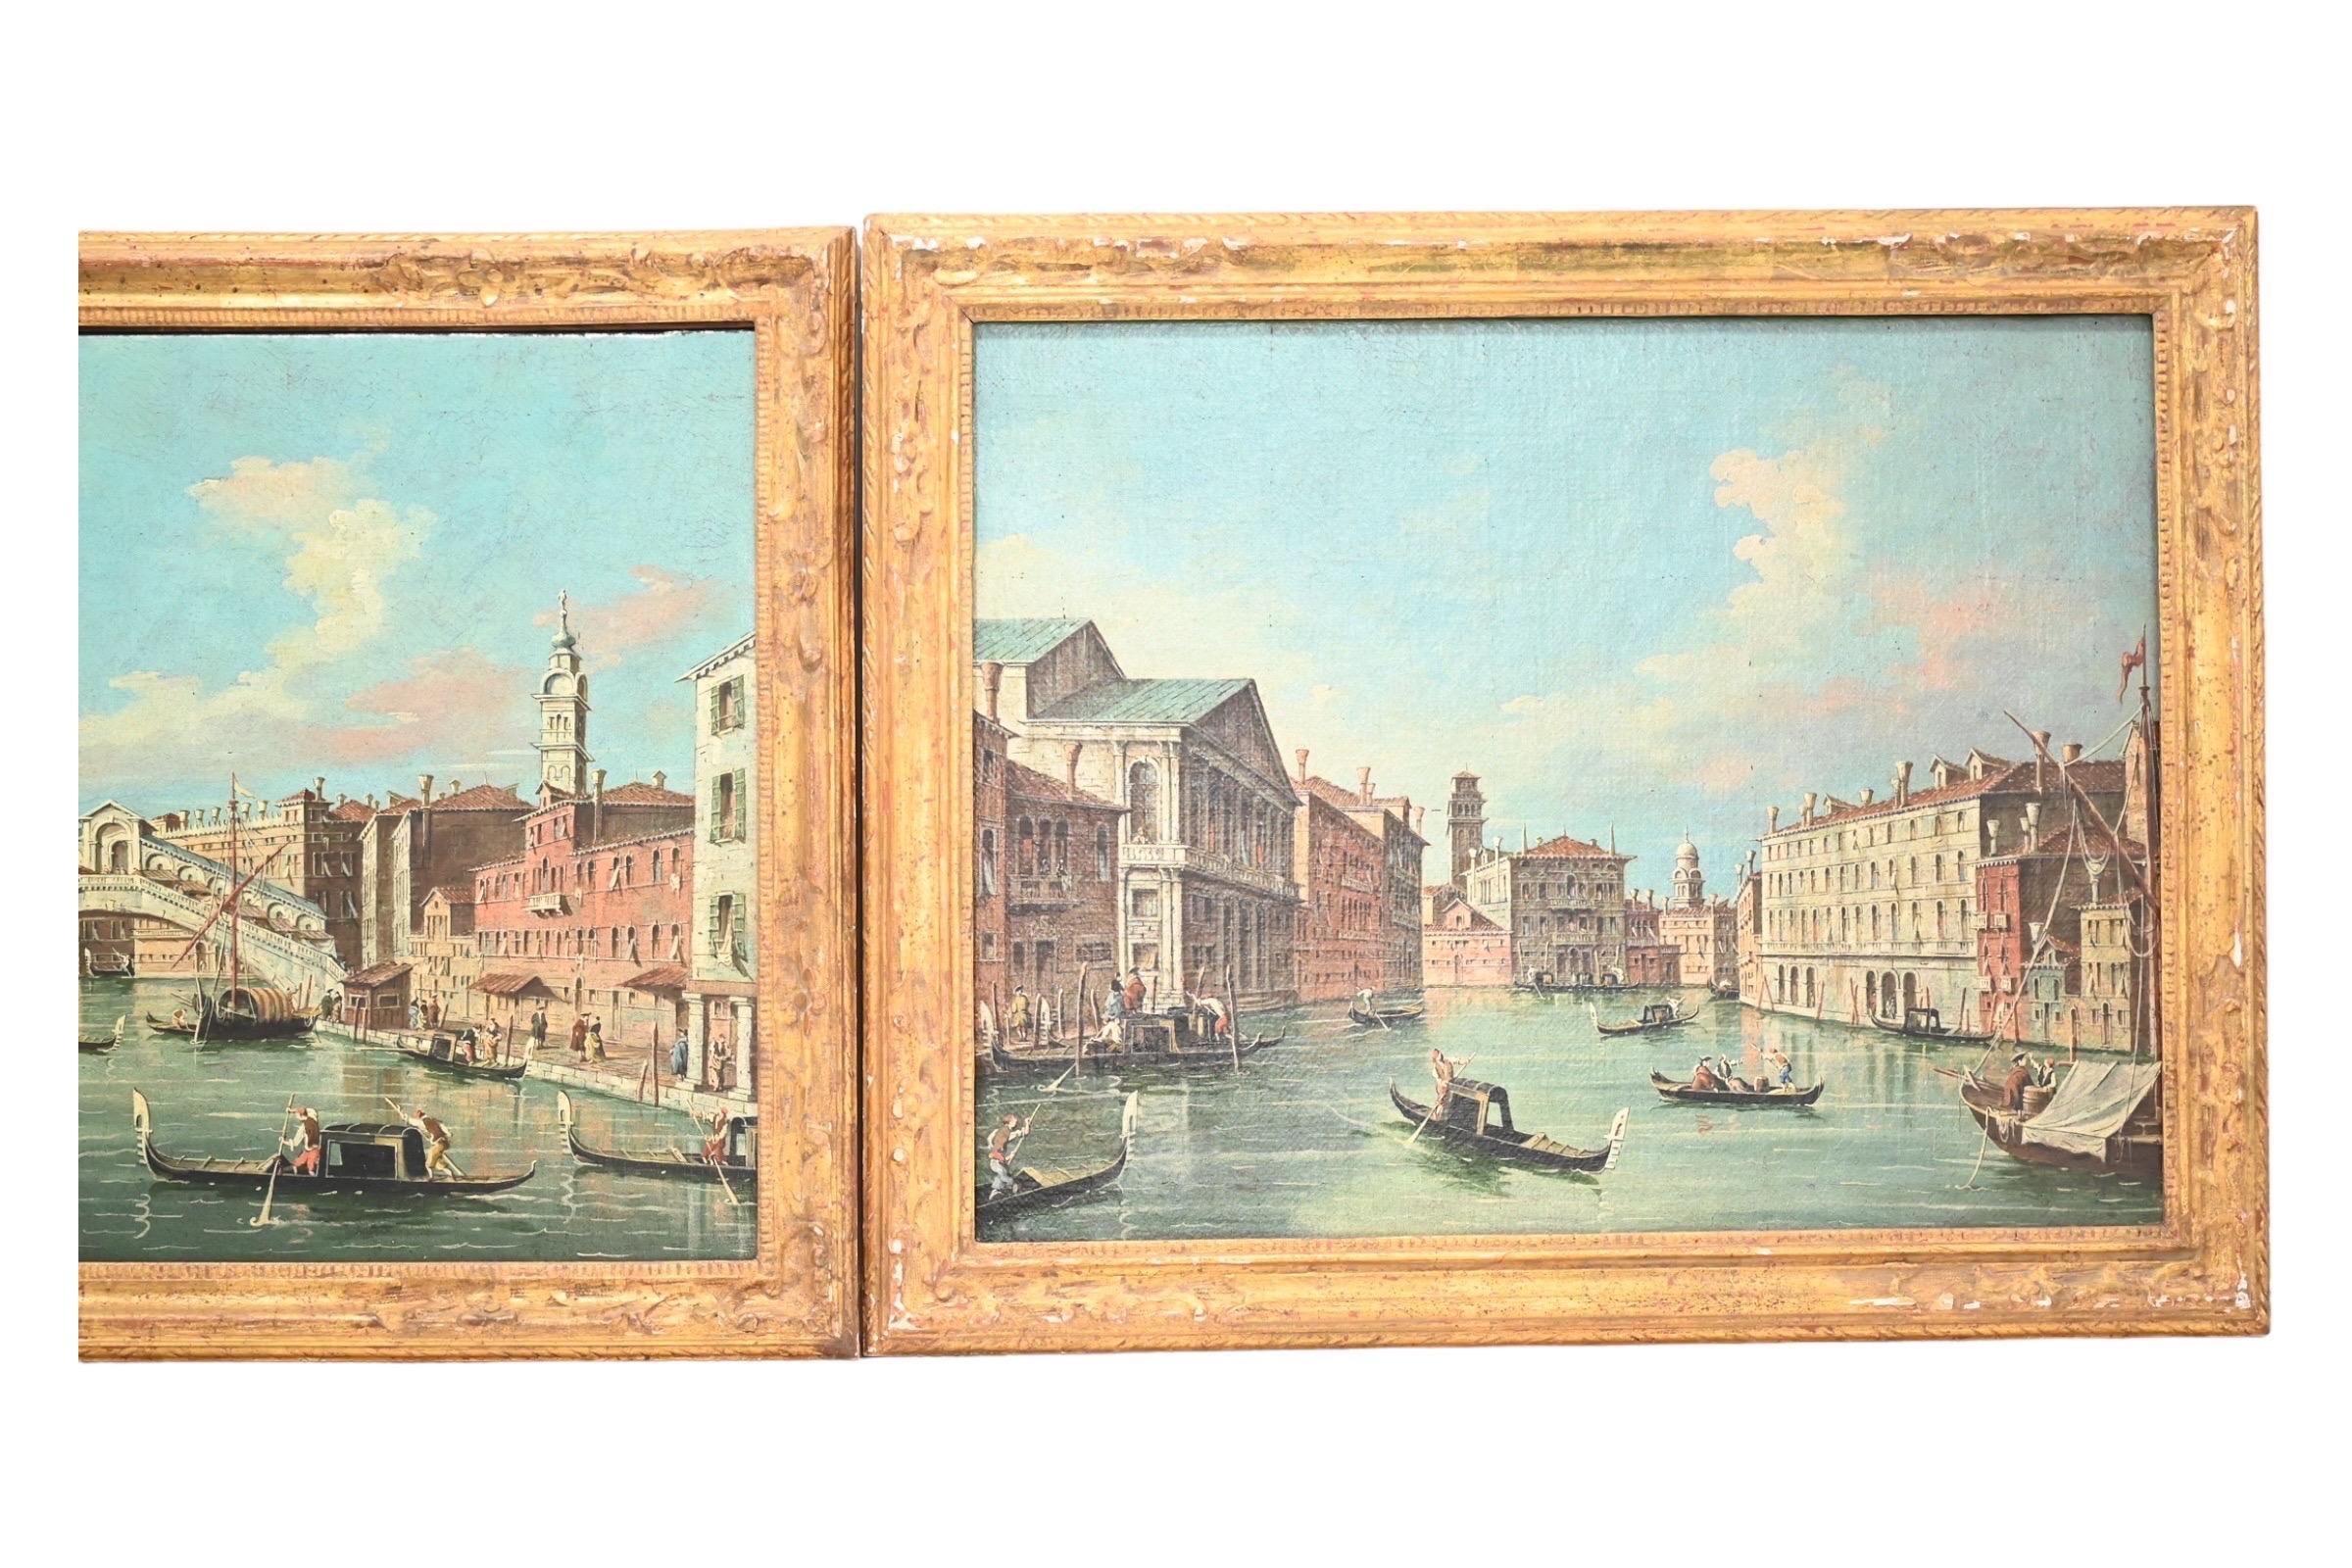 Exceptional Pair of Antique Venetian Oil on Canvas Painting Mid 19th Century  In Good Condition For Sale In Media, PA